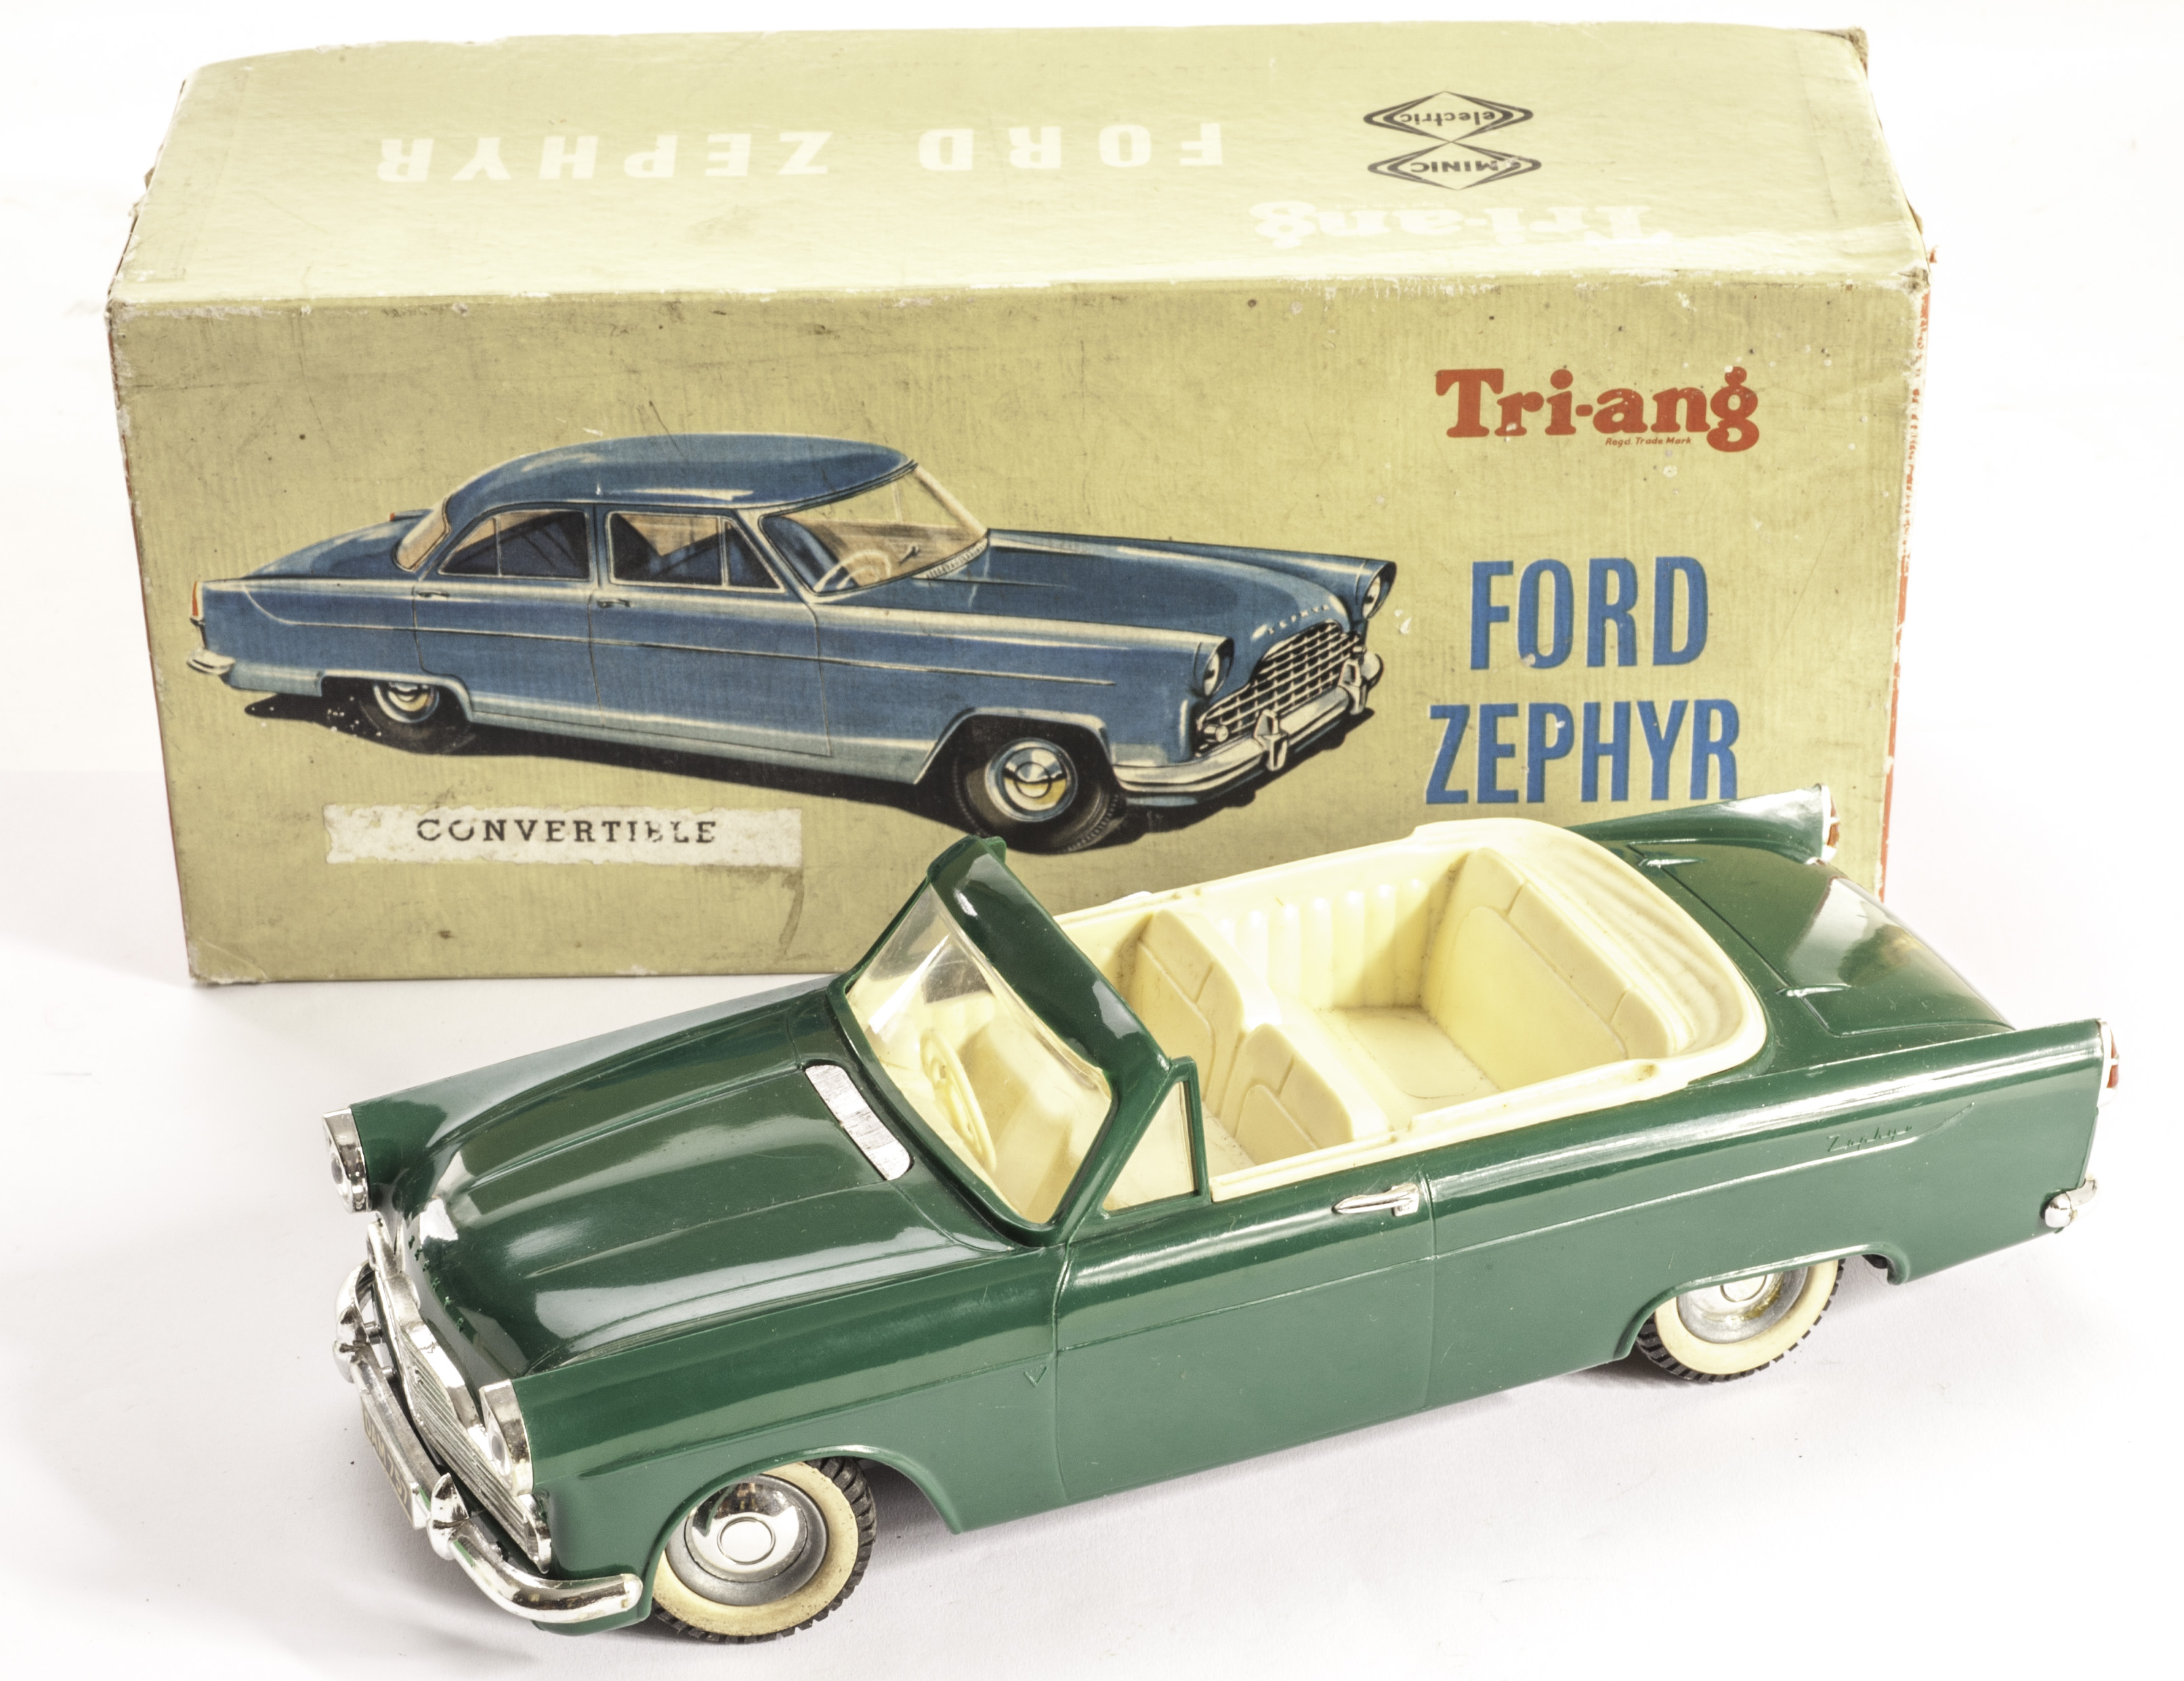 A Tri-ang Minic Electric 1/20 Ford Zephyr Convertible, large scale battery operated plastic model